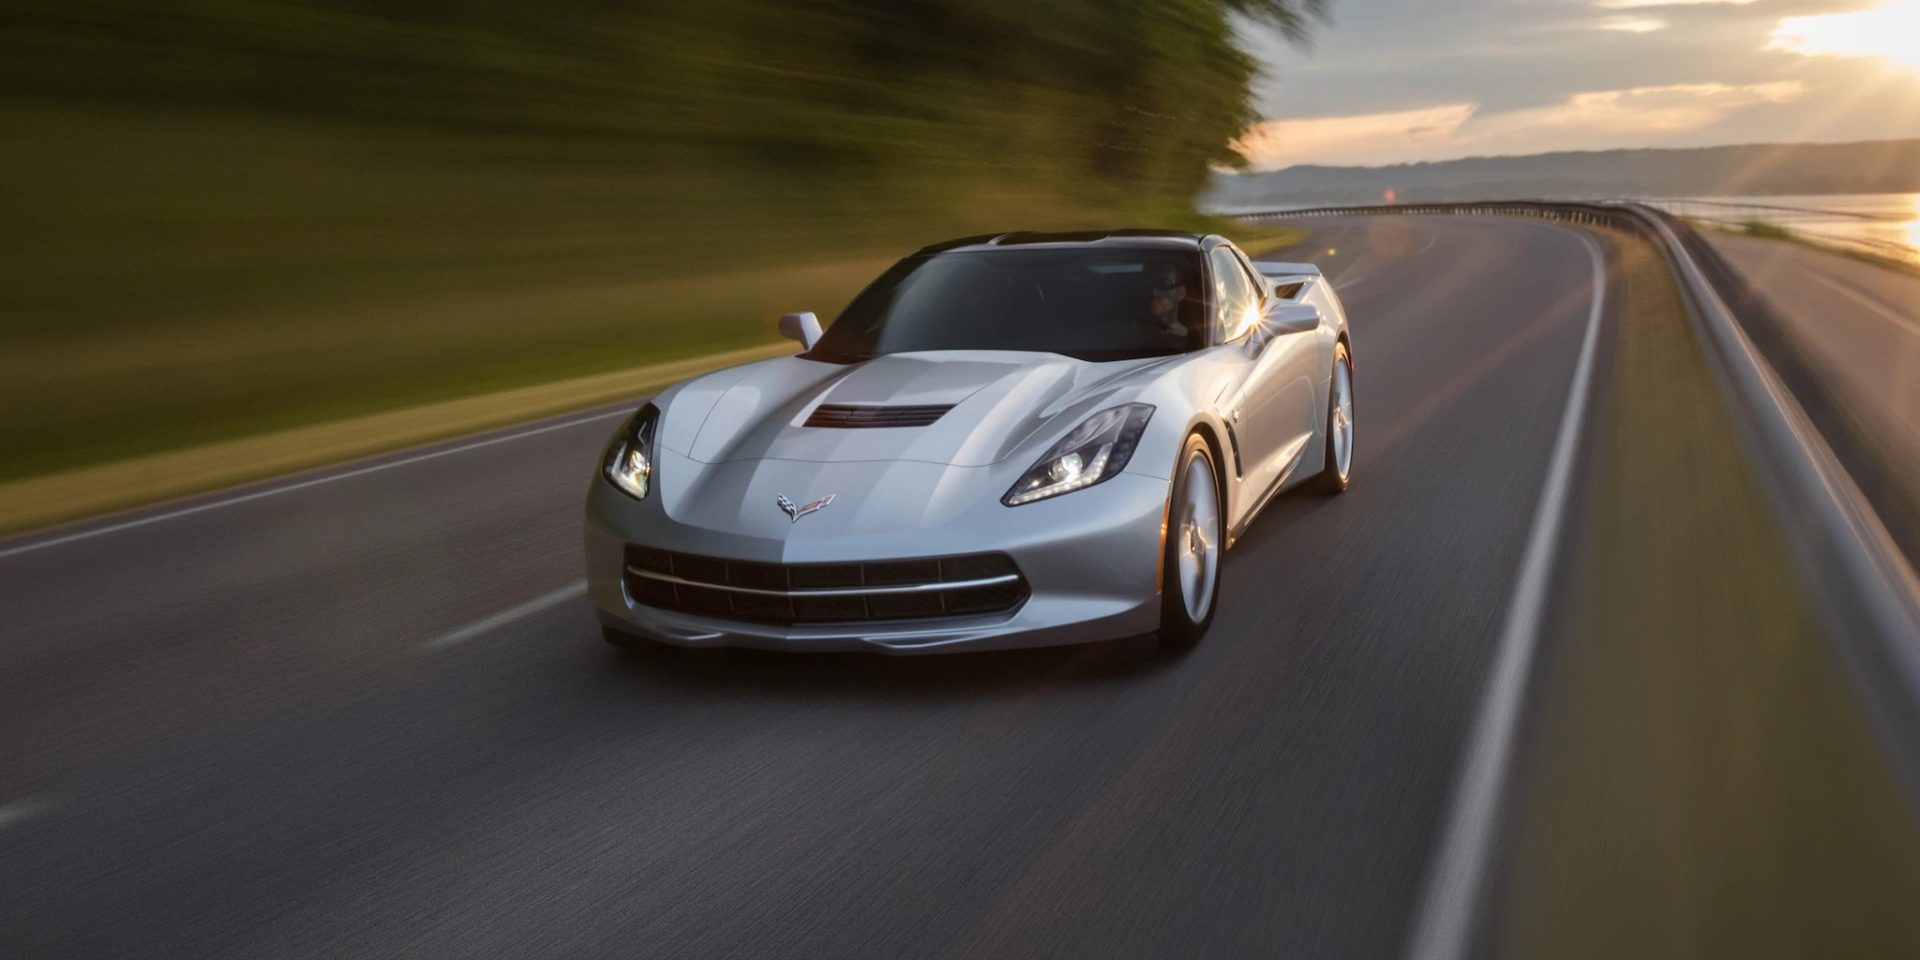 CHEVROLET CORVETTE FRONT VIEW IN THE MOTION